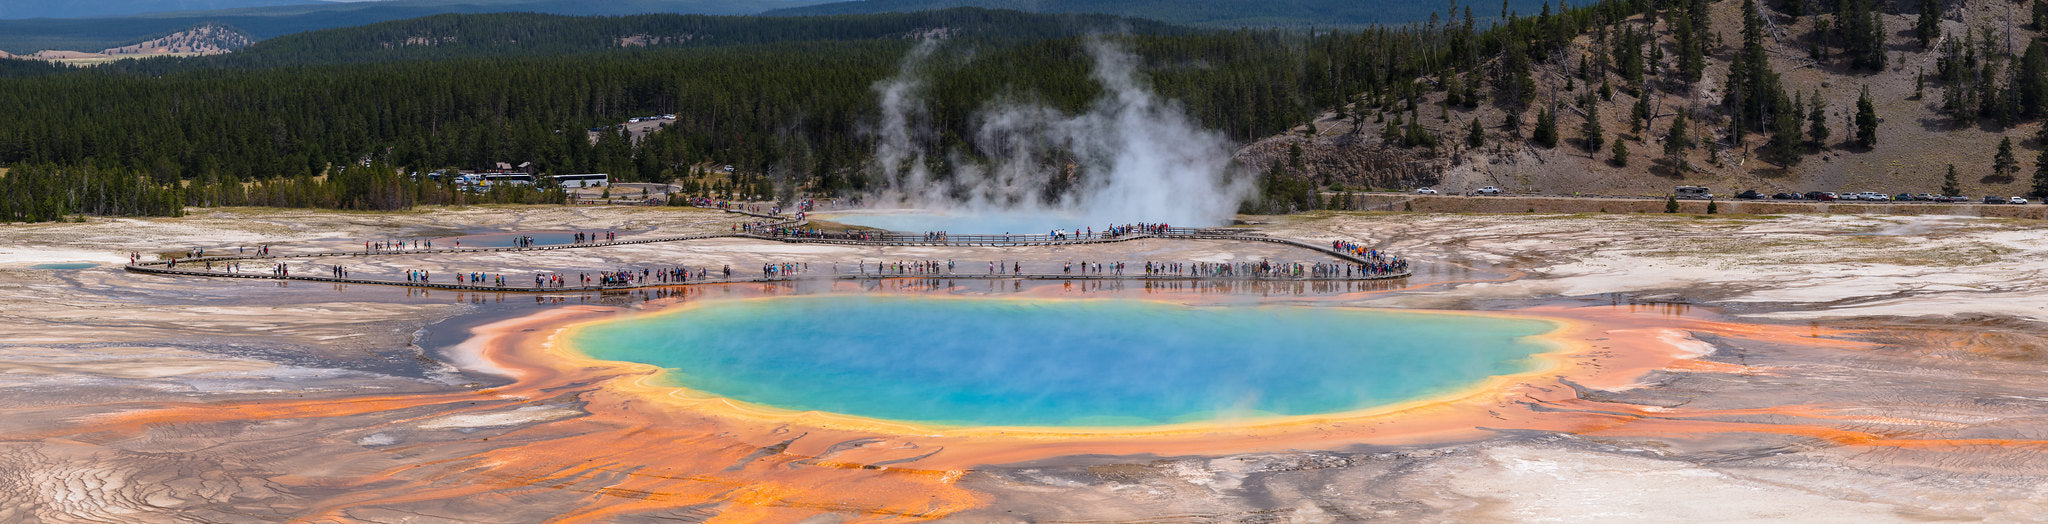 Grand Prismatic Spring Panorama by Jacob W. Frank